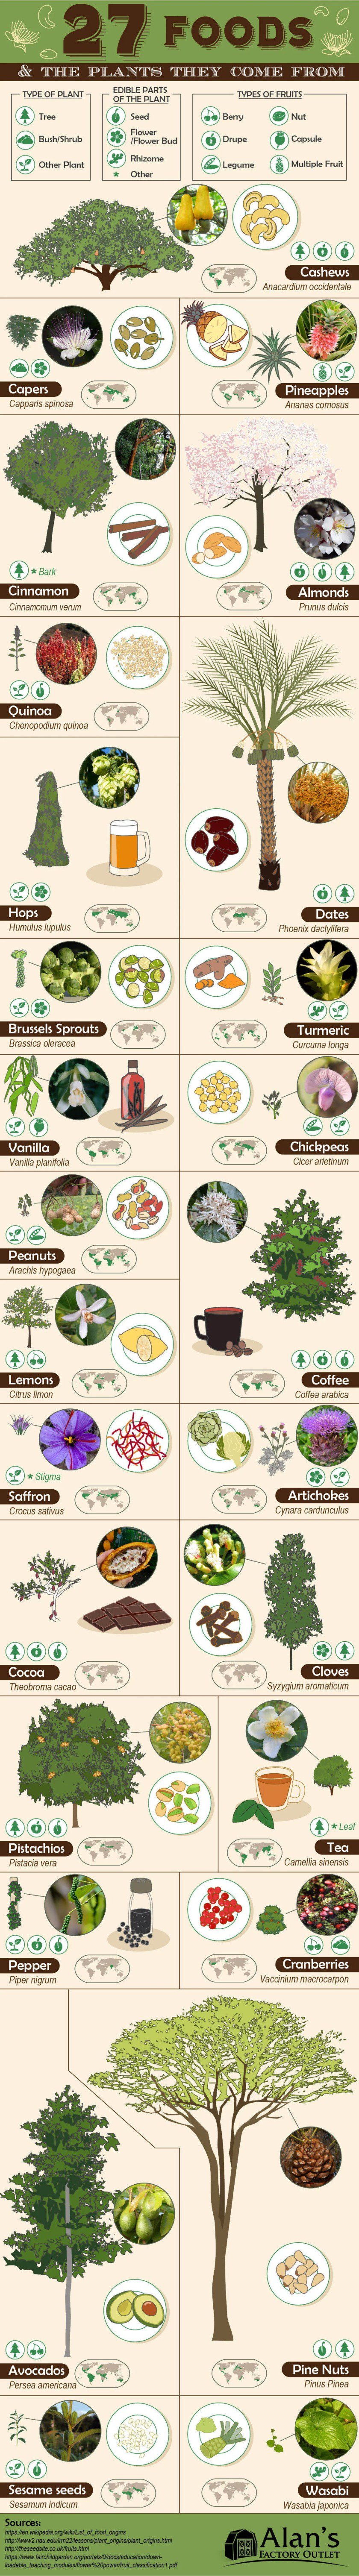 27 foods plants they come from